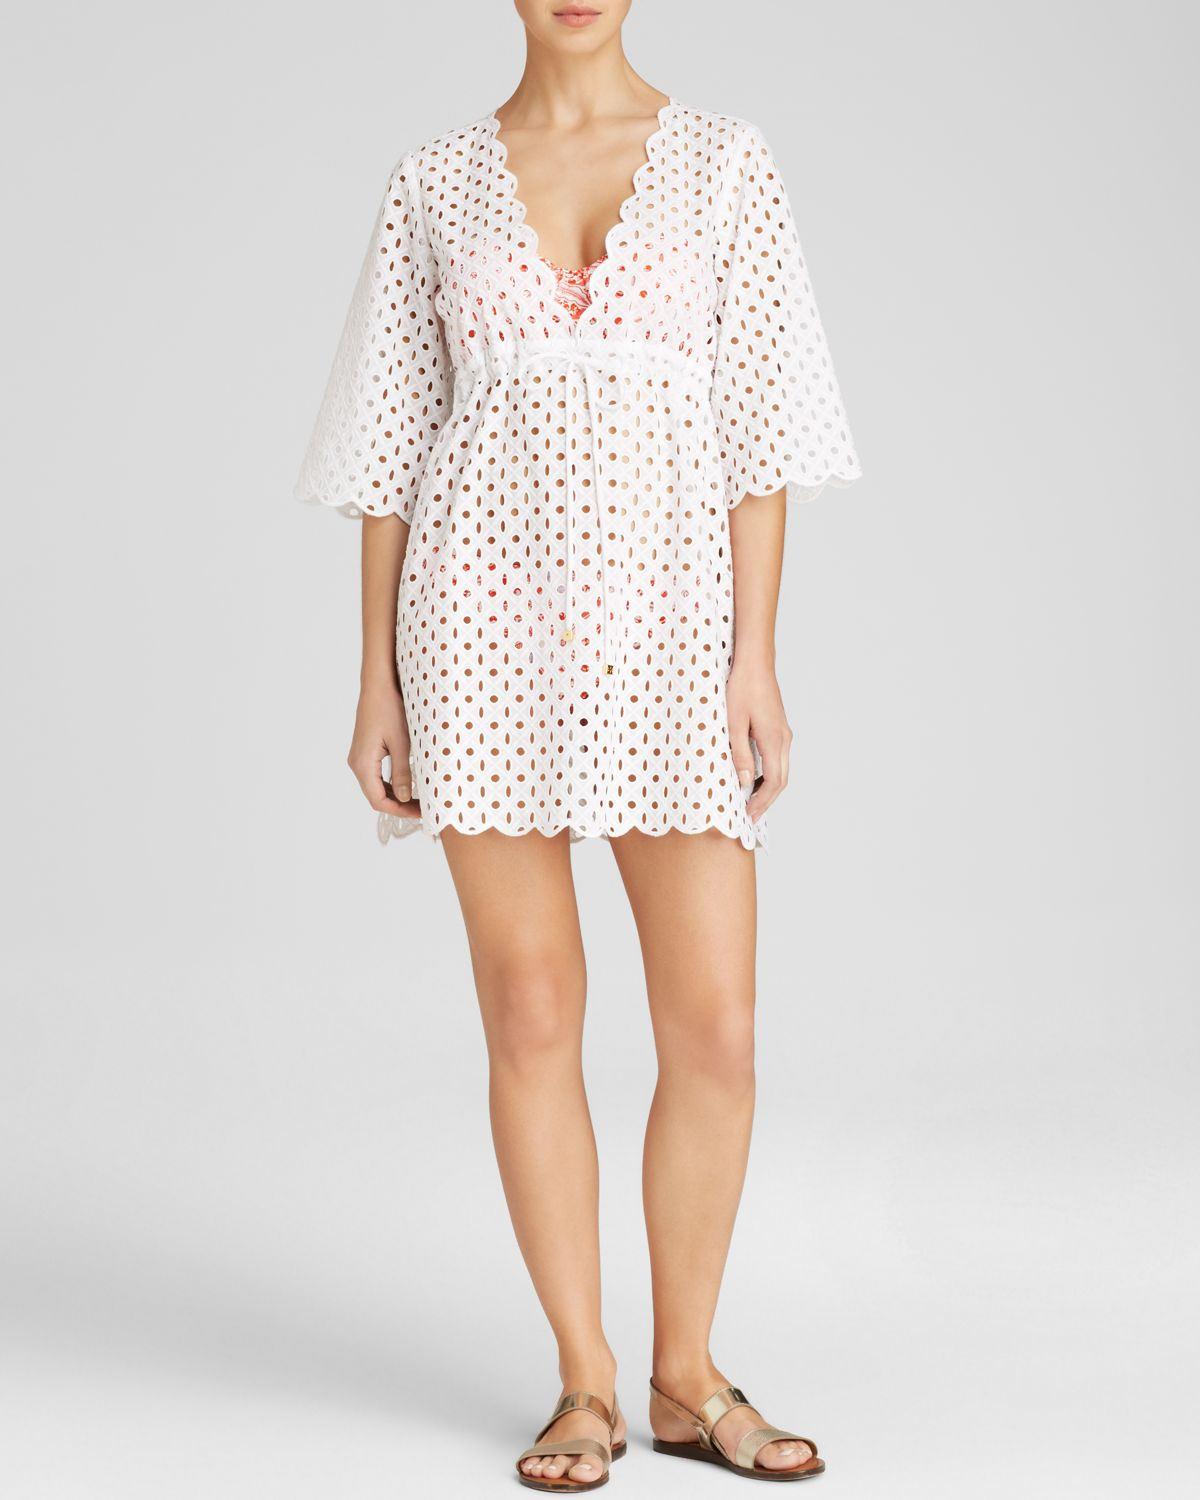 Tory Burch Broiderie Eyelet Swim Cover Up in White | Lyst